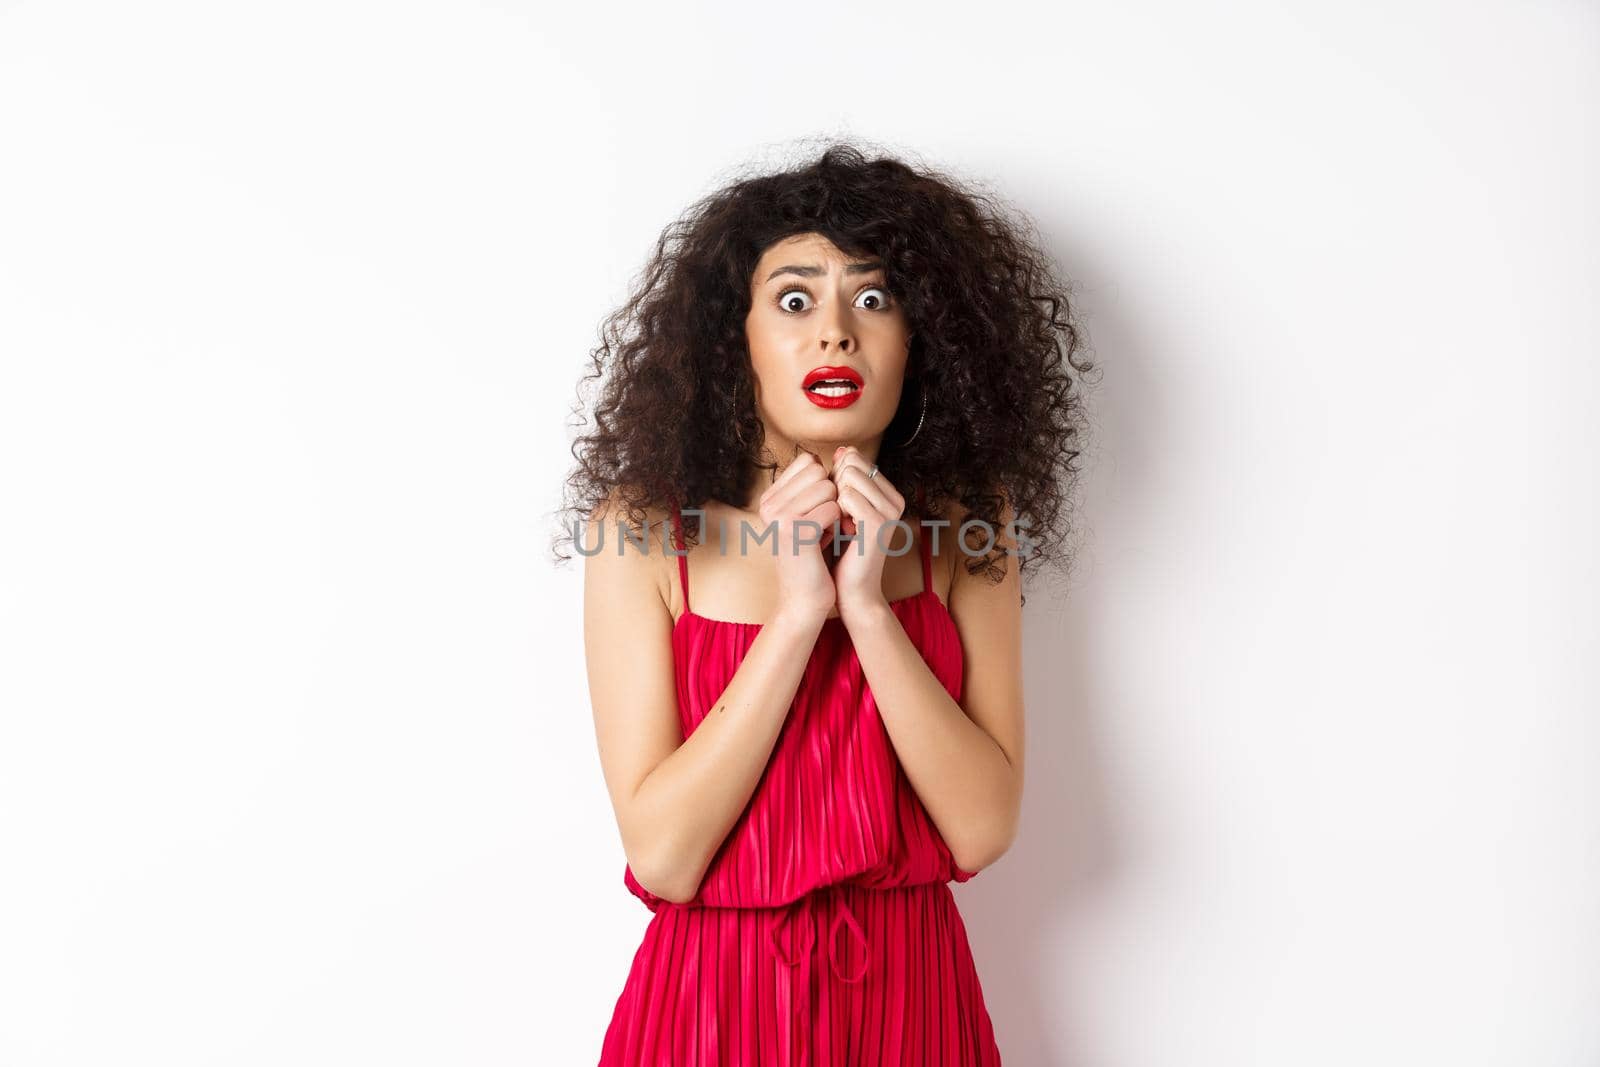 Scared caucasian woman trembling from fear, wearing red dress and staring anxious at camera, standing over white background.